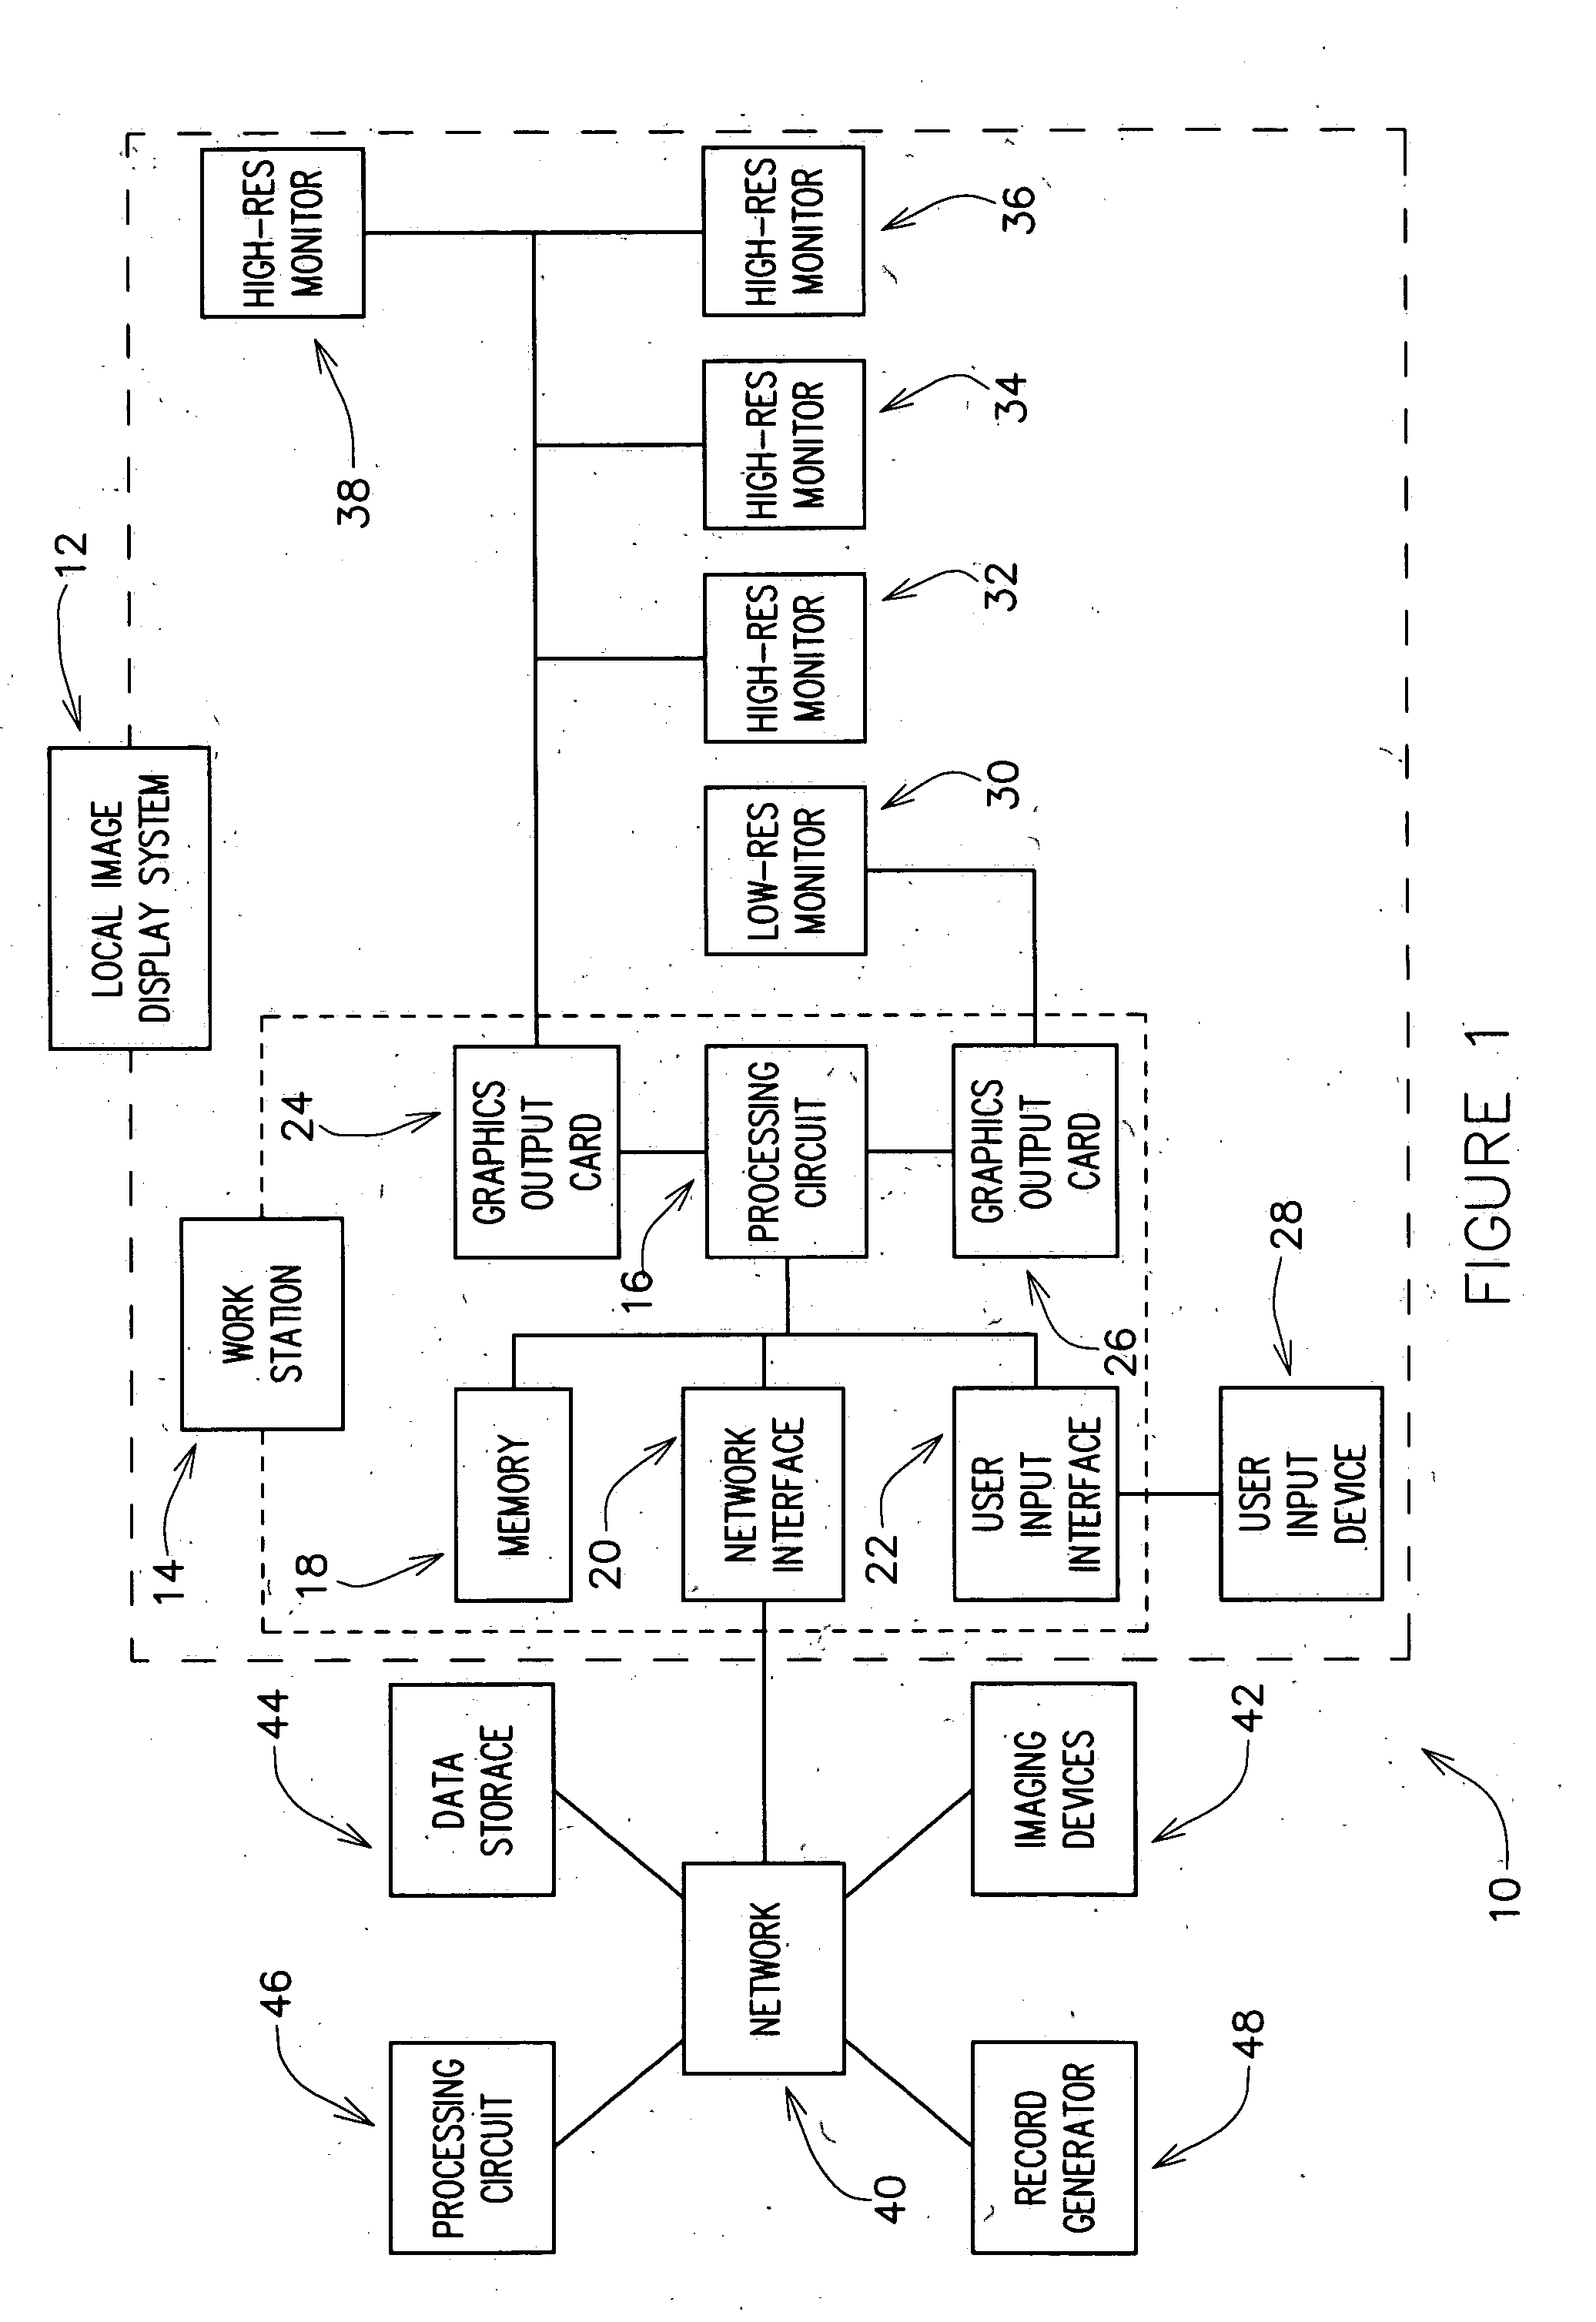 Methods and apparatus for displaying images on mixed monitor displays